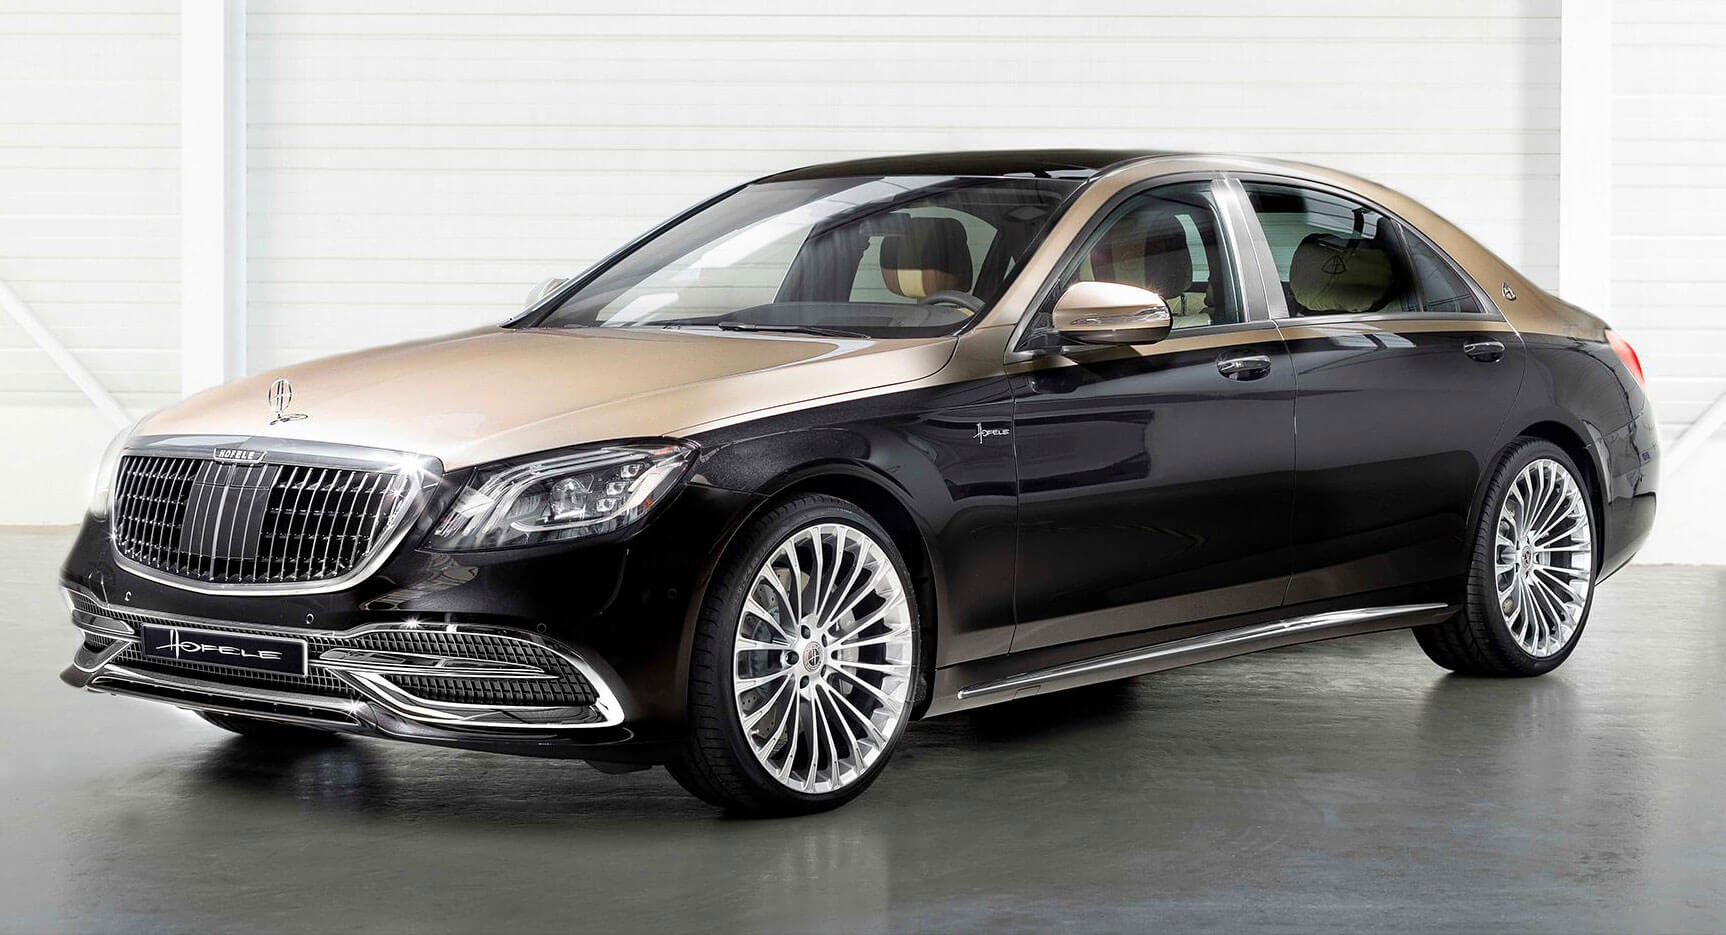 Mercedes S-Class By Hofele Is A Unique Maybach Wannabe | Carscoops